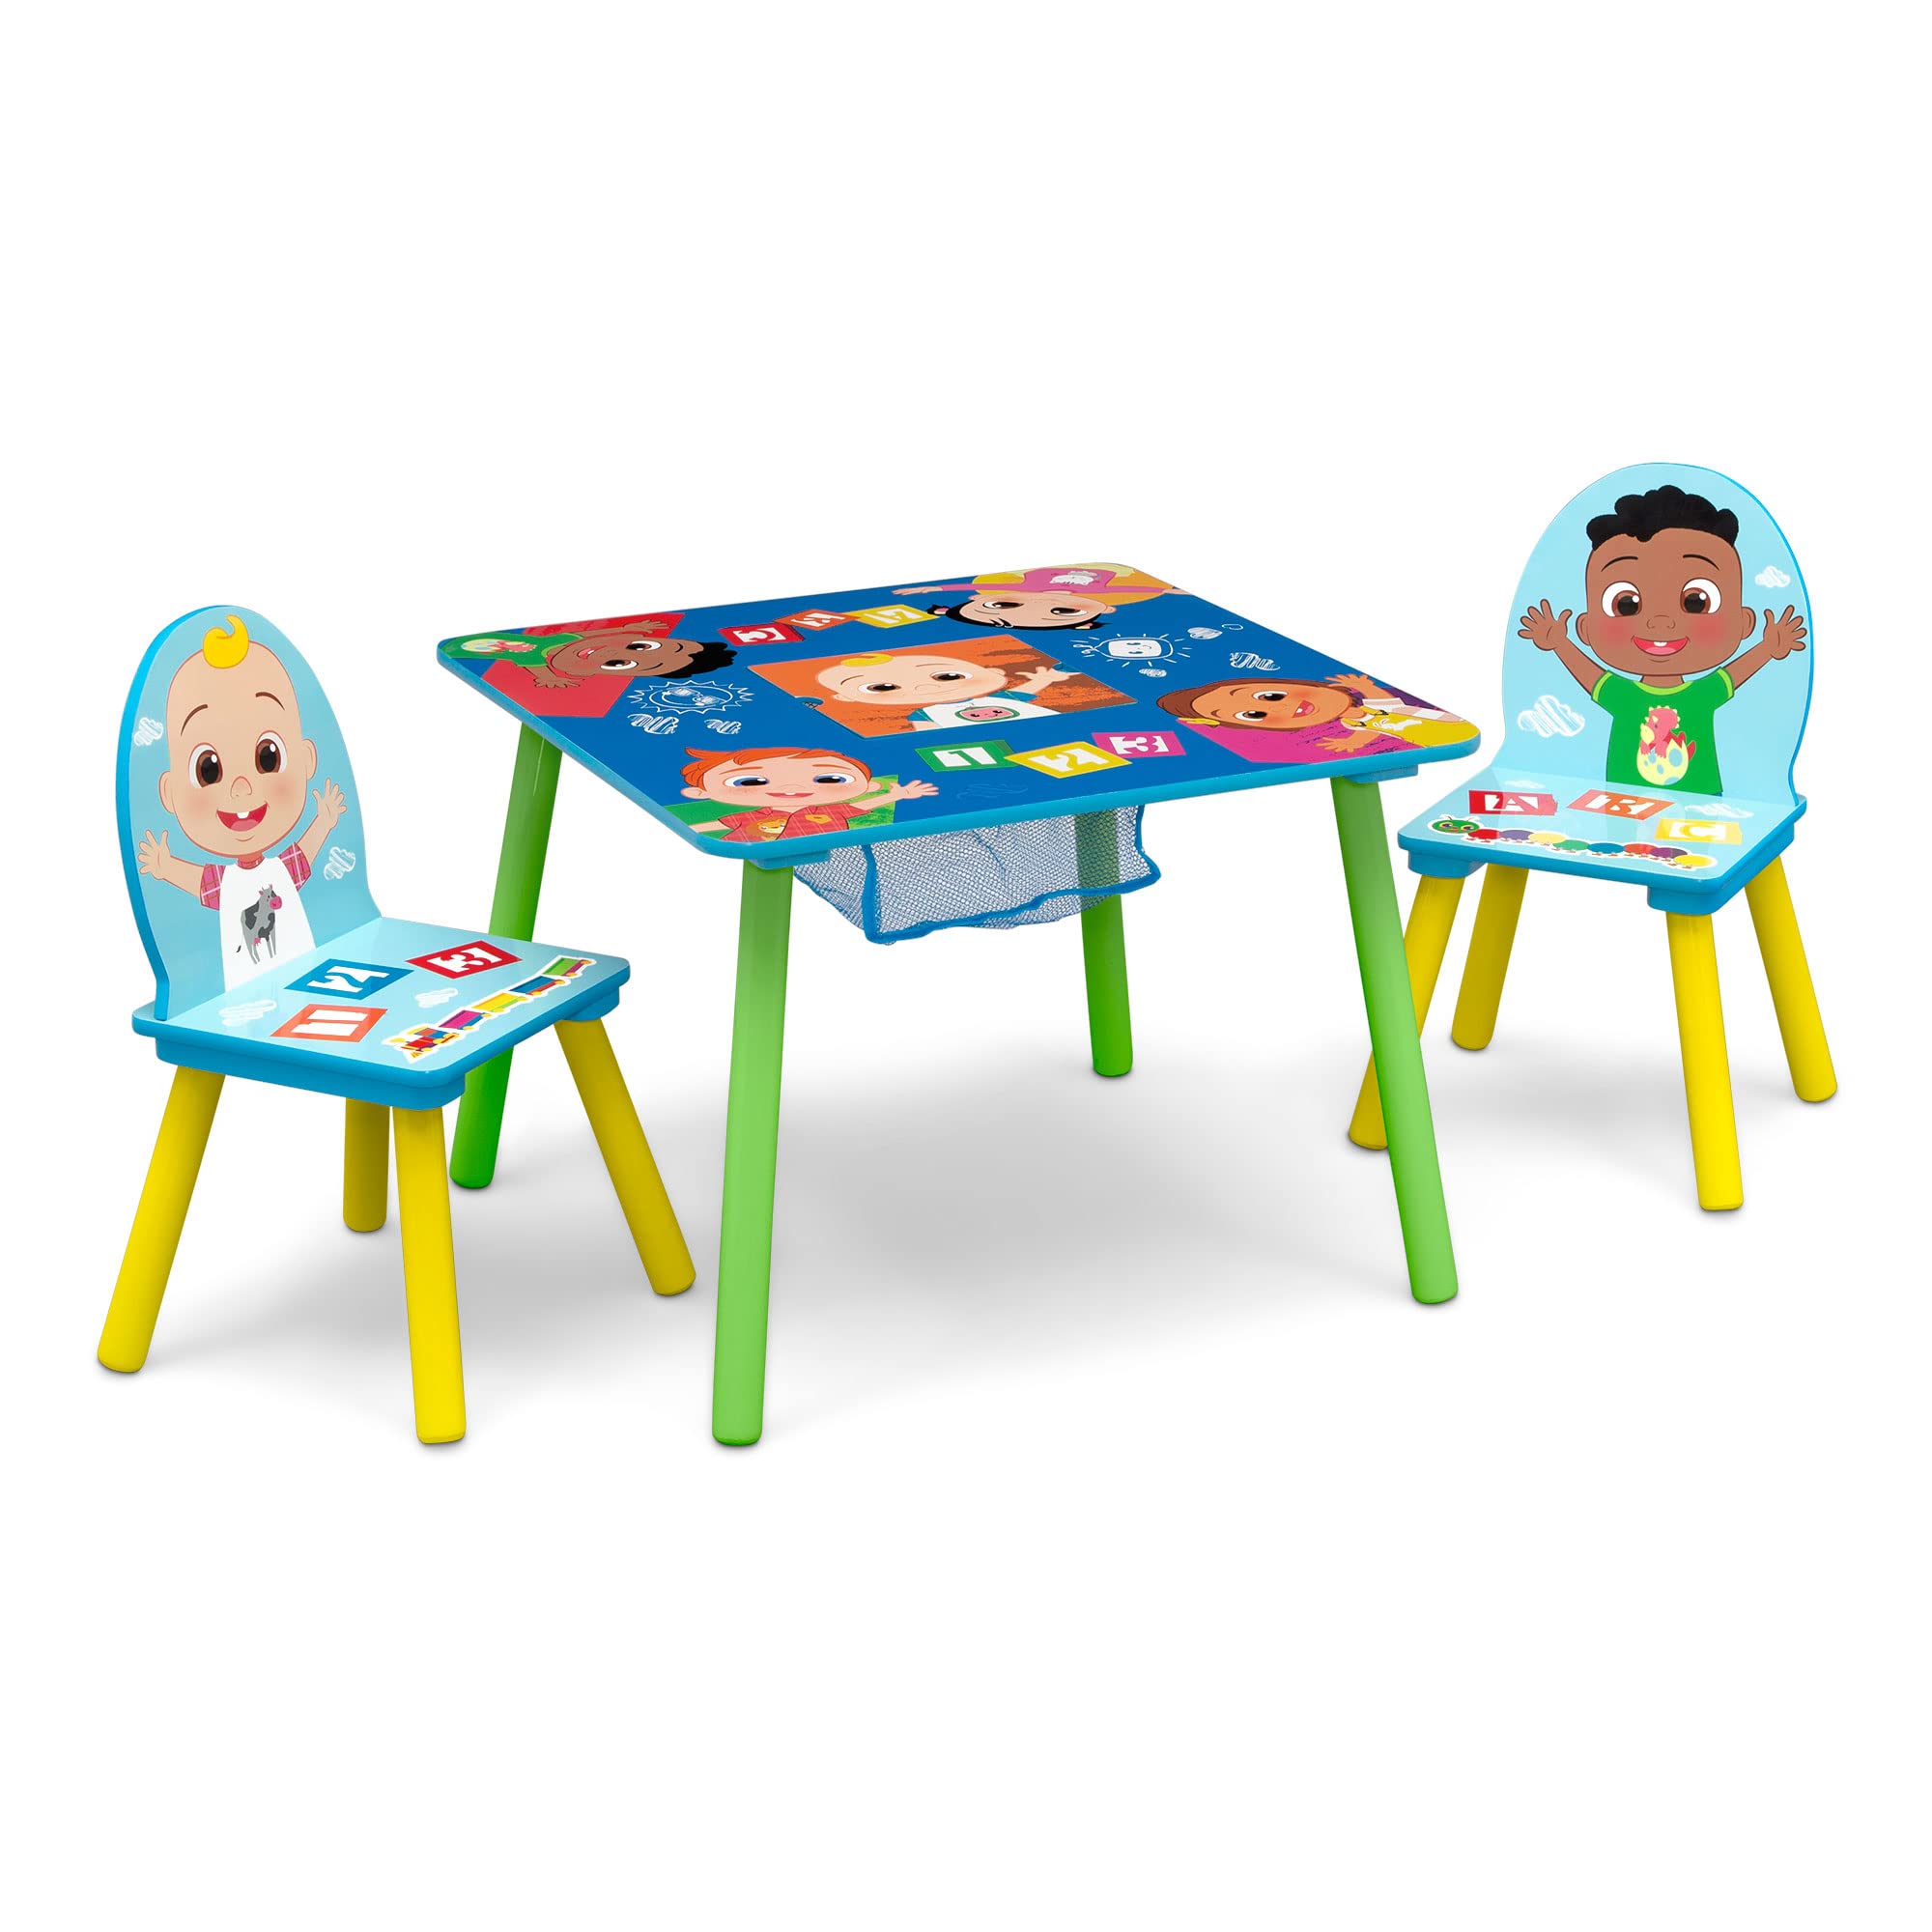 Delta Children Kids Table and Chair Set with Storage (2 Chairs Included) - Greenguard Gold Certified - Ideal for Arts & Crafts,